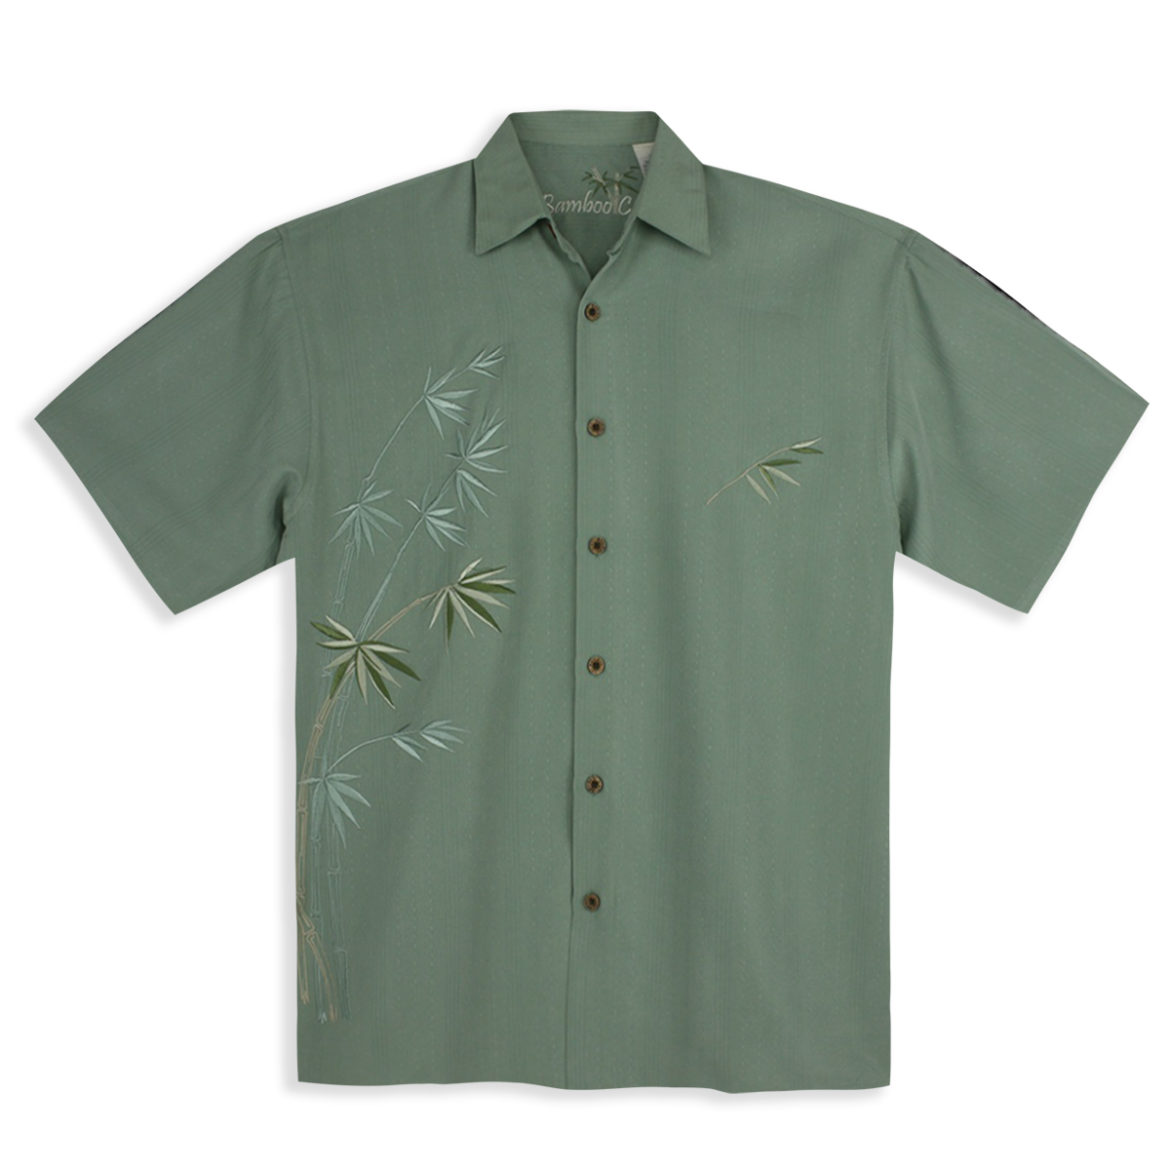 Bamboo Cay Men's Shirt - Flying Bamboo - Reseda A great shirt for your next vacation. It travels well, so you can wear it as soon as you arrive!